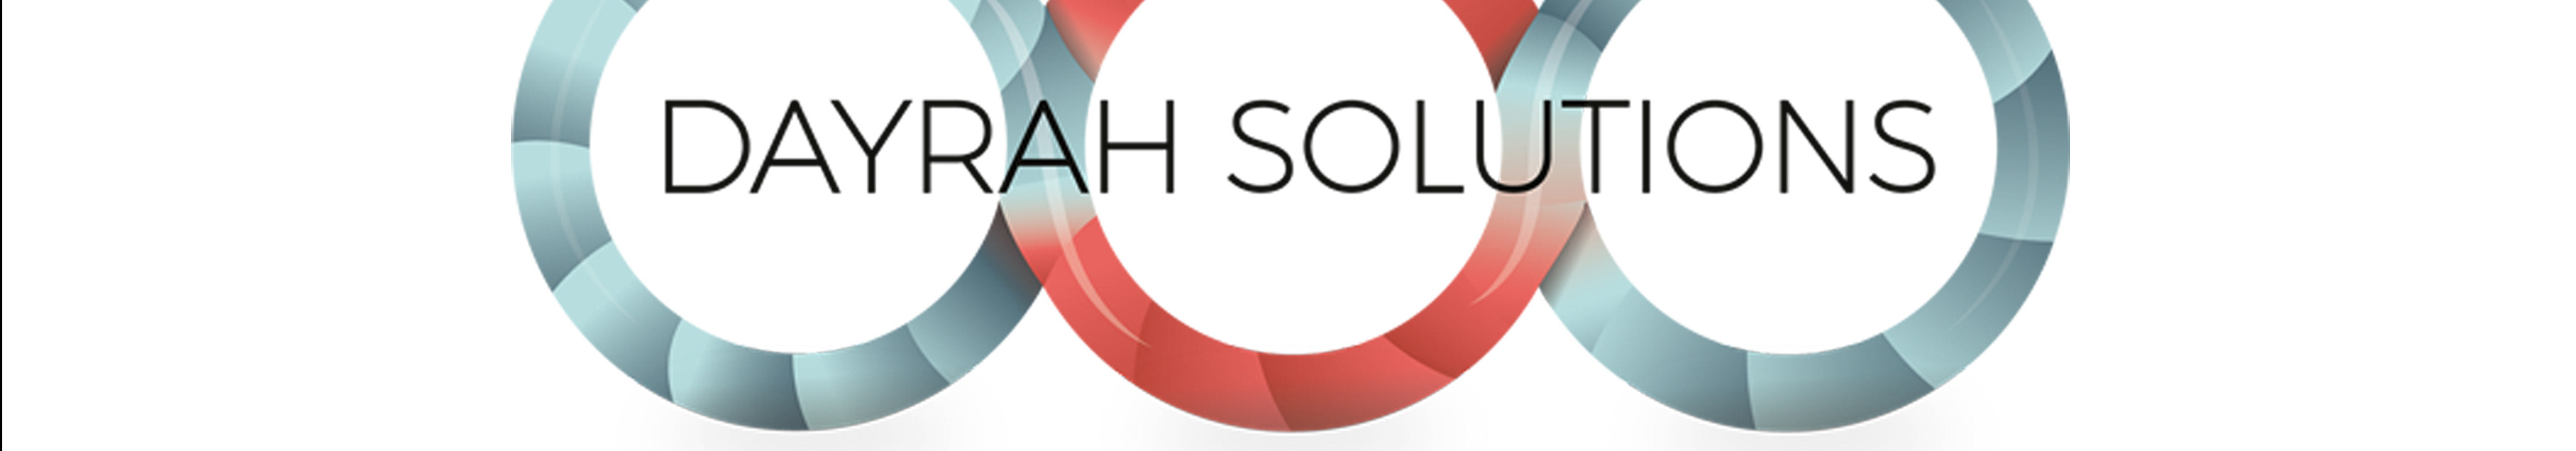 Dayrah Solutions's profile banner